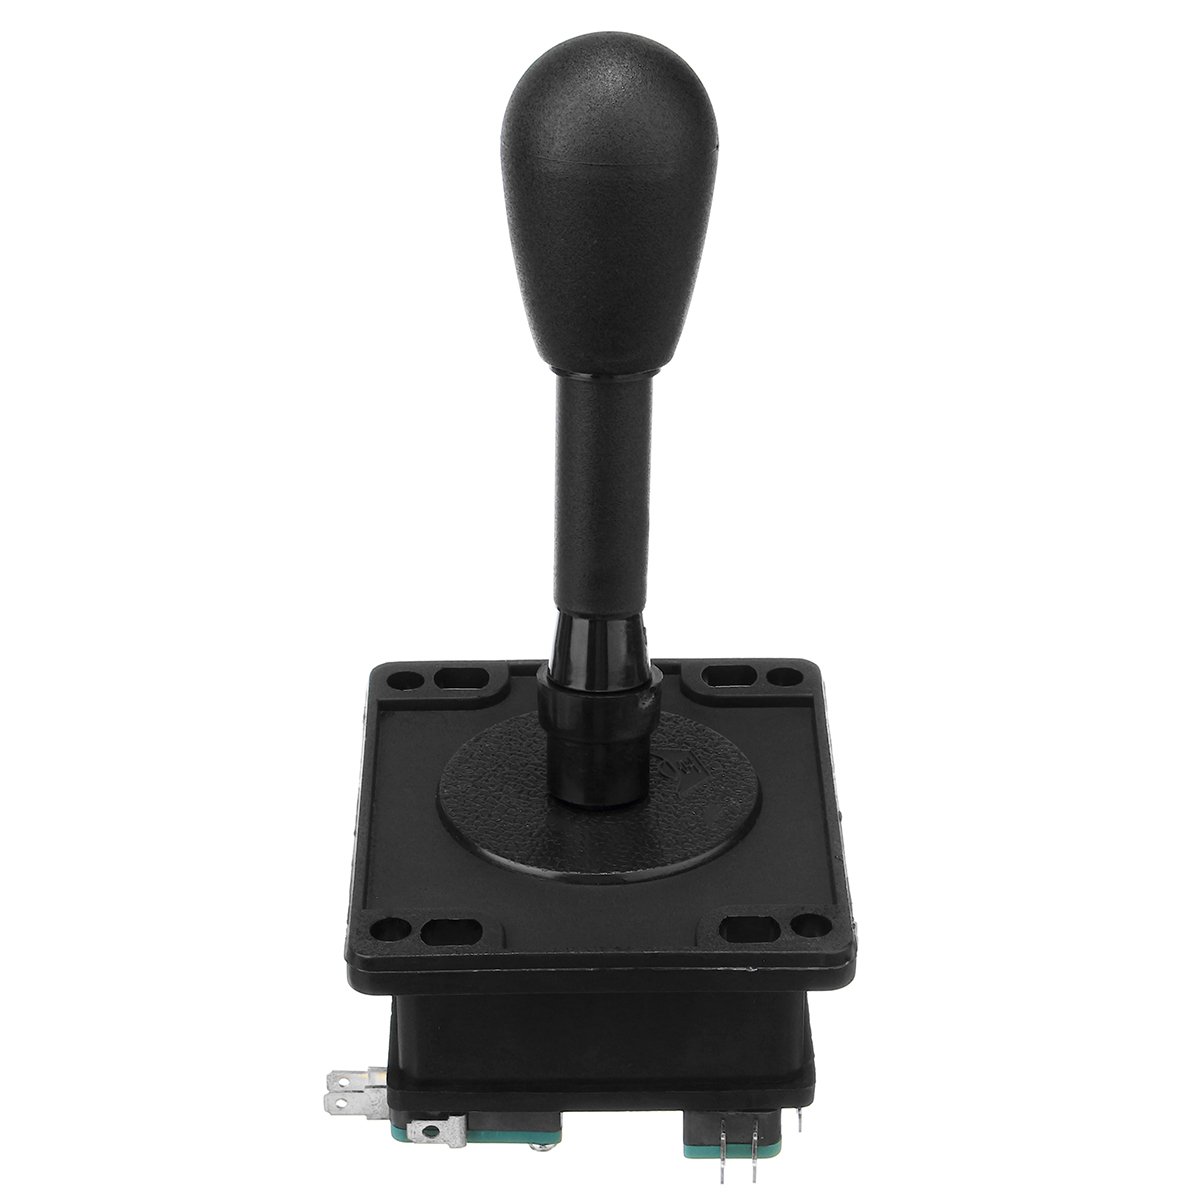 8 Way HAPP NEO GEO Competition Joystick for Arcade Game Console Controller 1